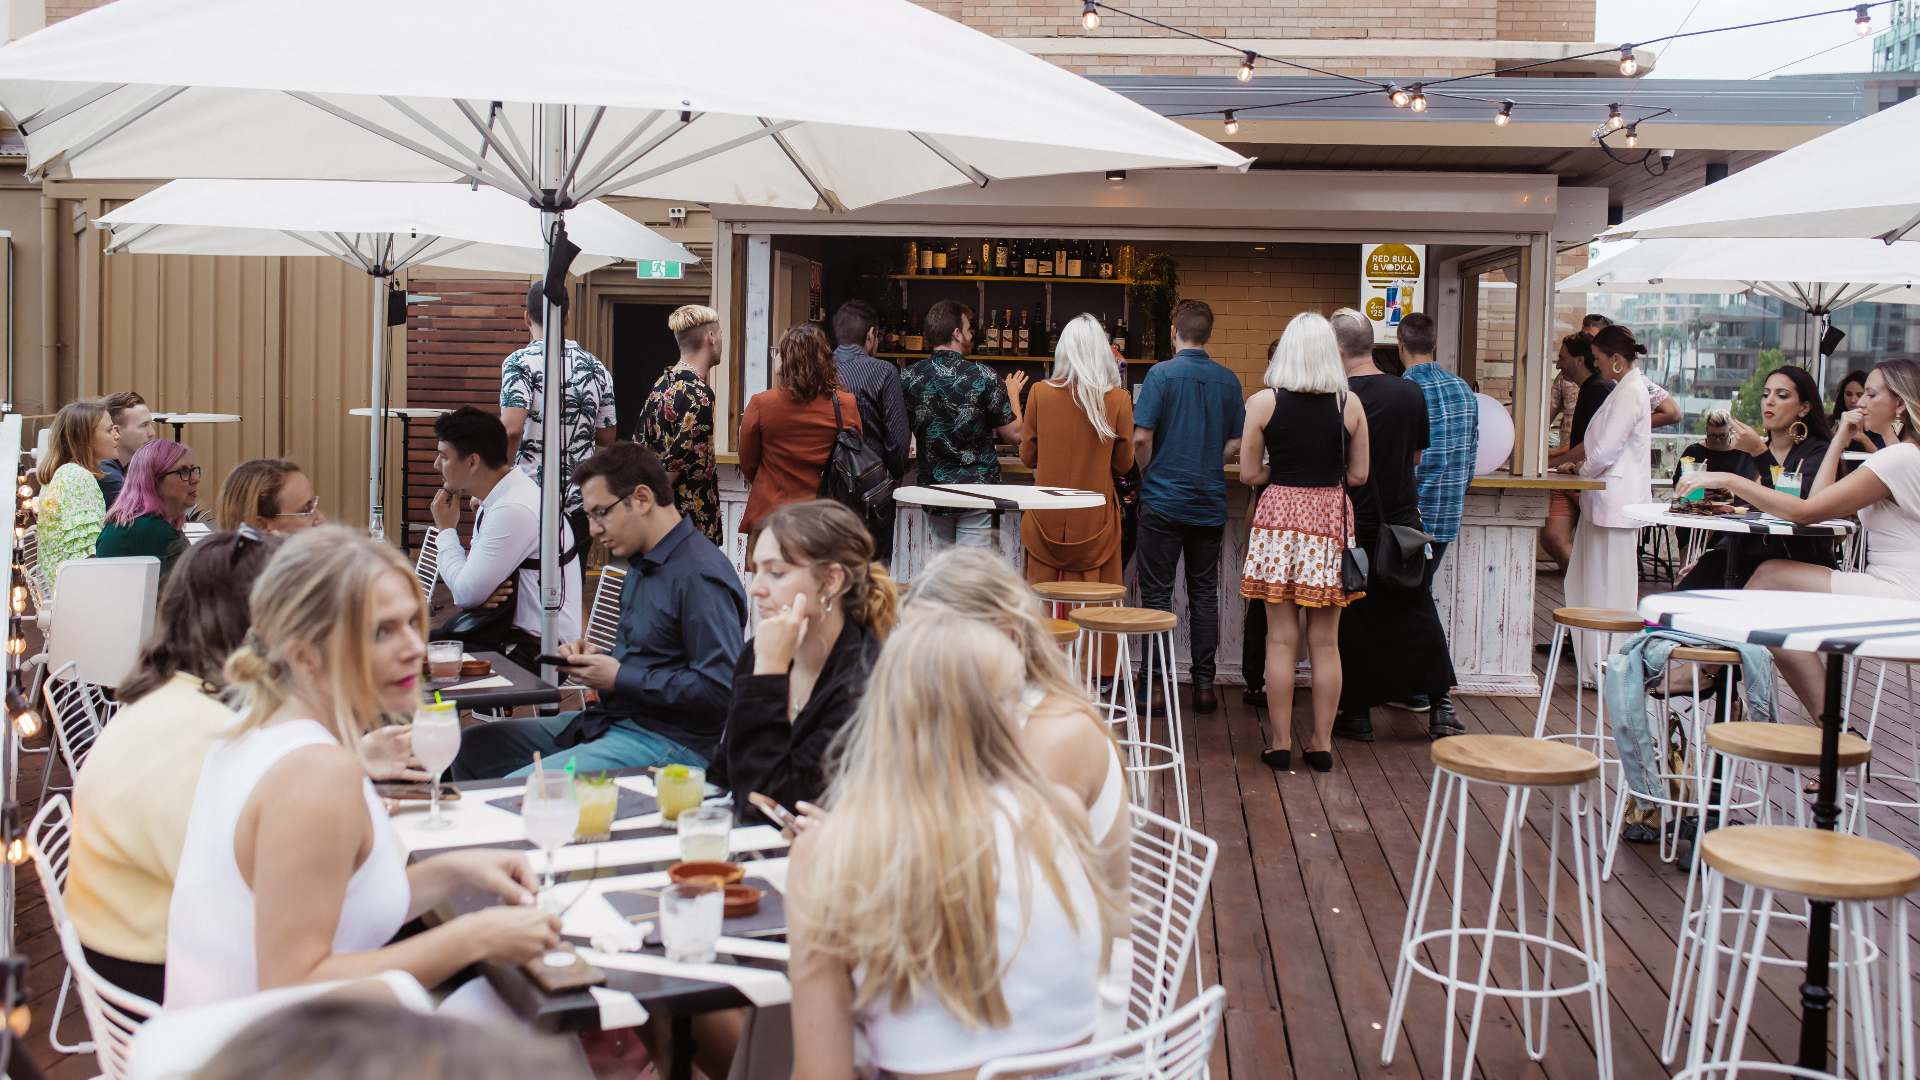 The Burdekin Hotel Has Expanded with a New Rooftop Bar Overlooking Hyde Park and Oxford Street